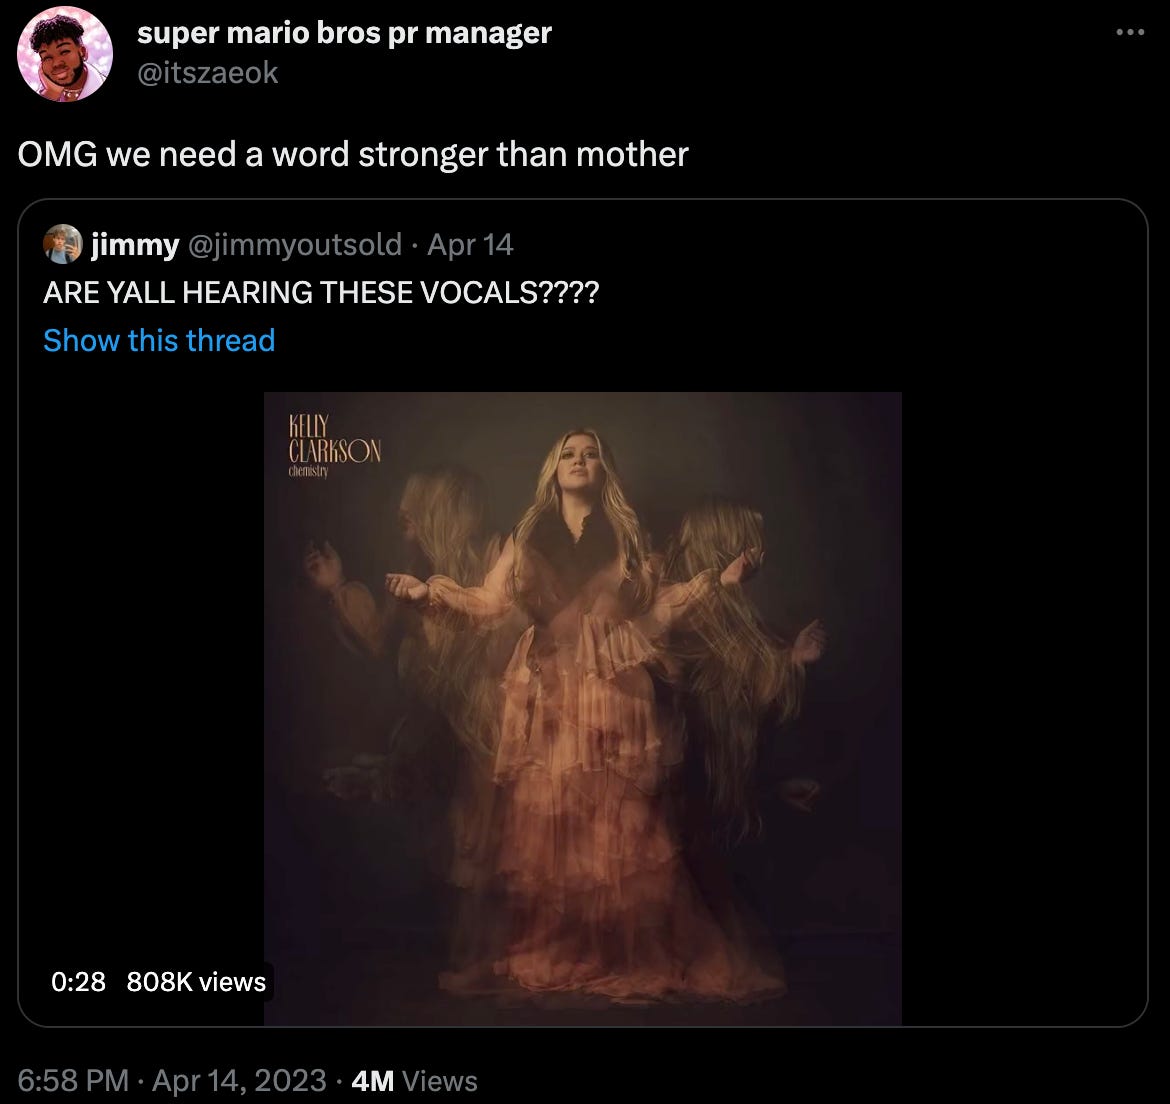 @itszaeok retweeting a clip from Kelly Clarkson's new single: OMG we need a word stronger than mother